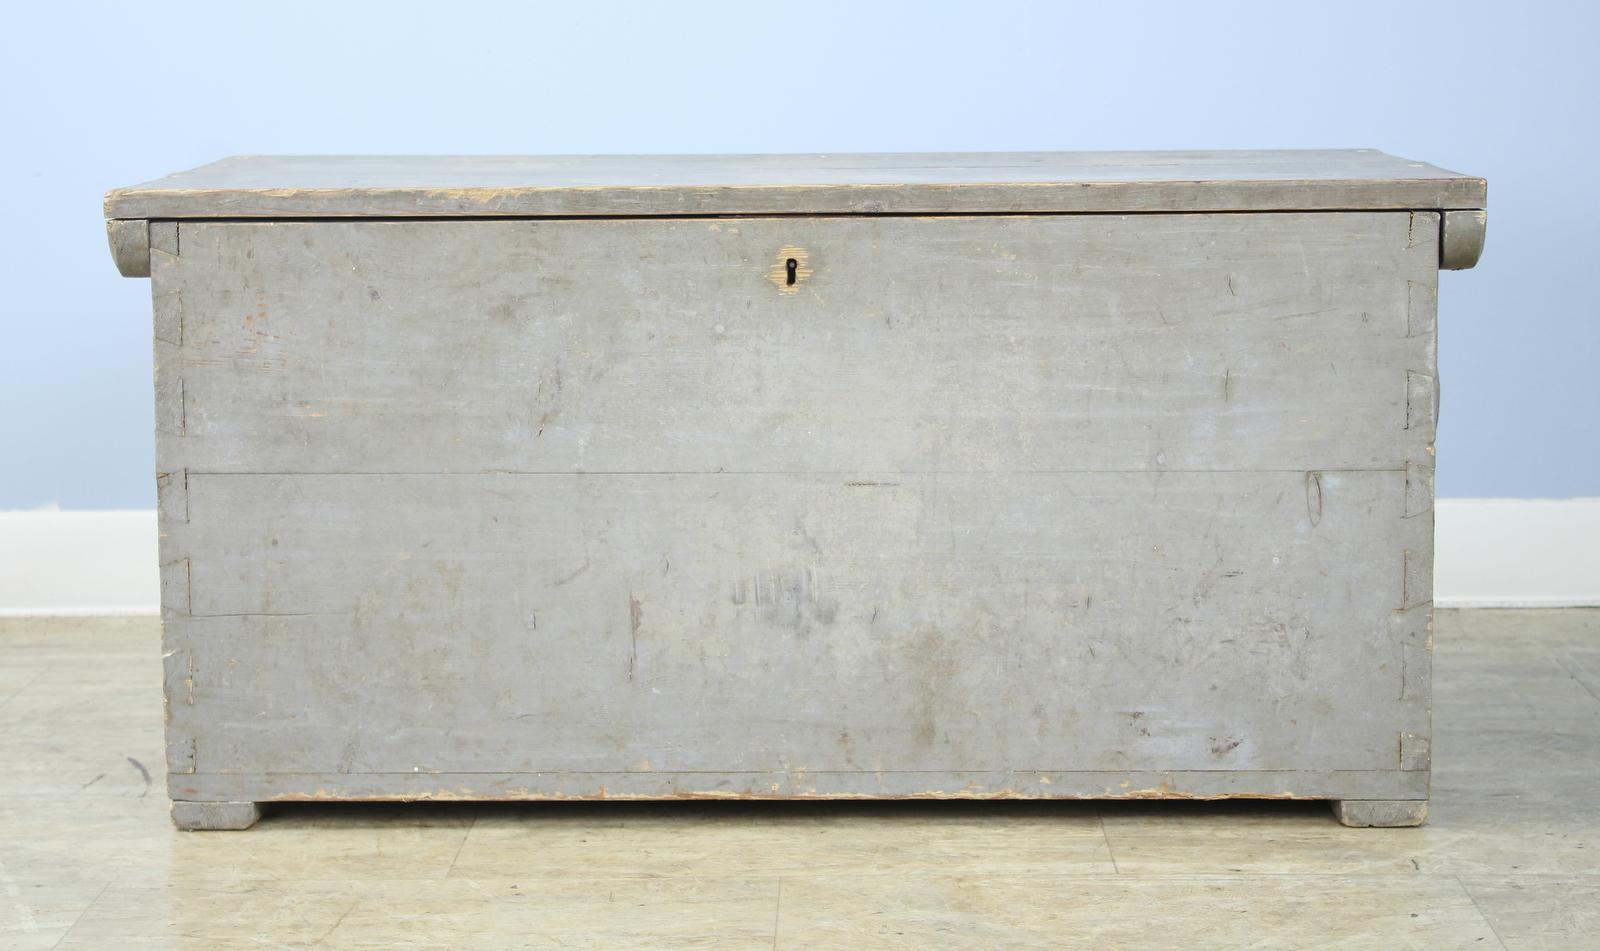 A great old blanket chest, probably used for storage at sea, with the original thick rope handles. Though the original paint is quite distressed the whole thing works, and is a great look for a country or seaside cottage. The interior has a little